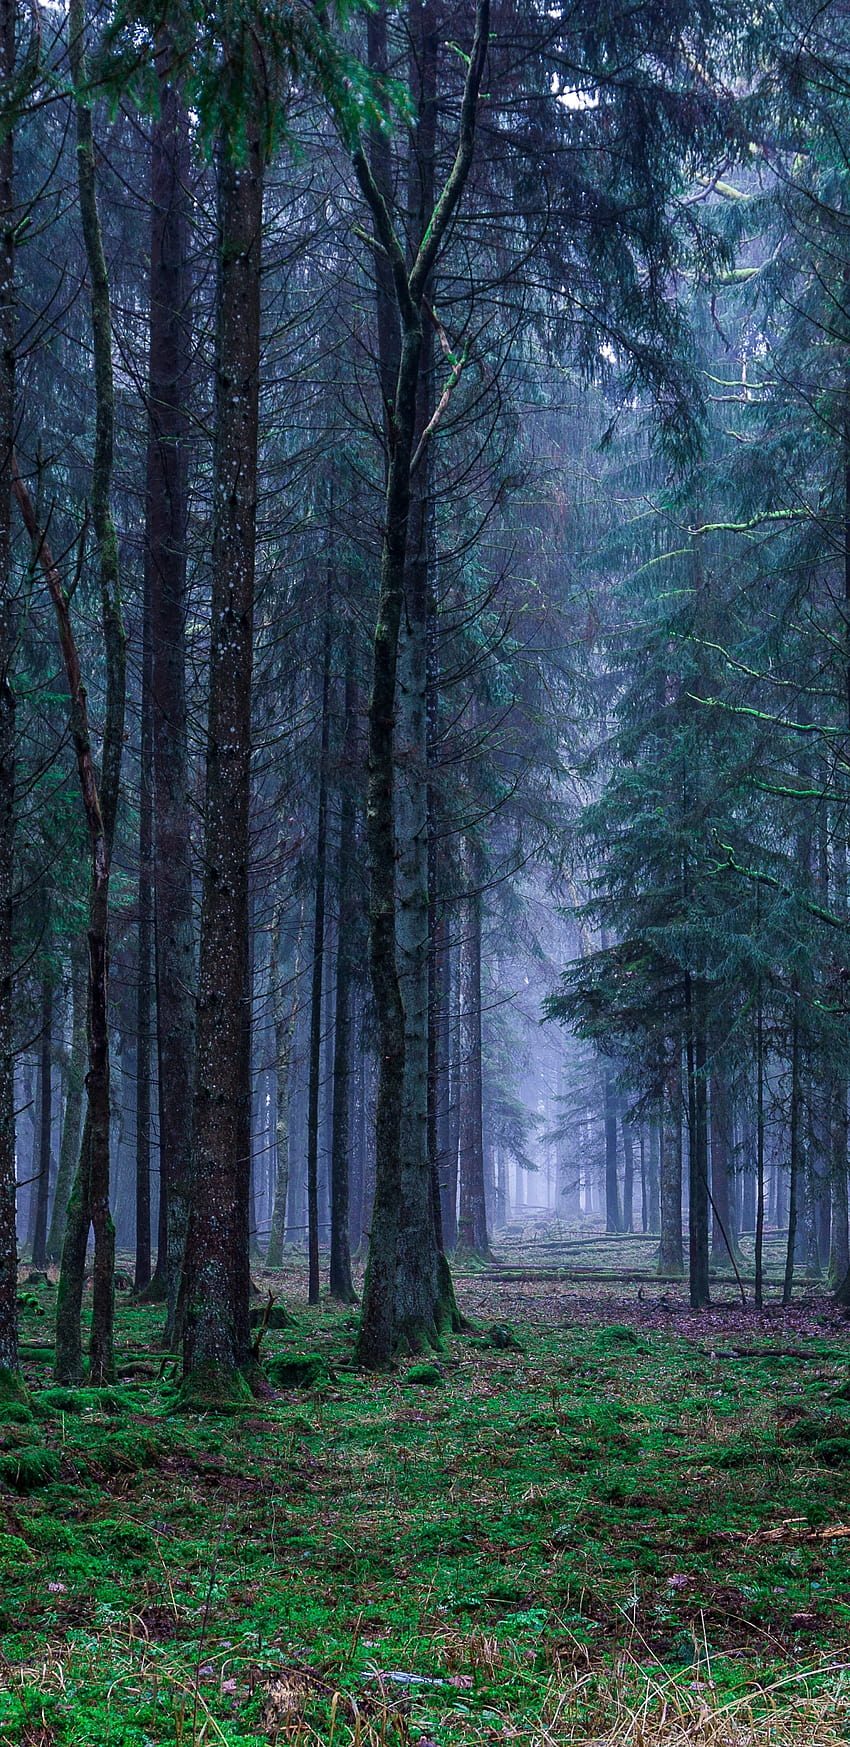 1440x2960 Forest, Grass, Fog, Trees, Foliage for Samsung Galaxy S9, Note 9, S8, S8+, Google Pixel 3 XL HD phone wallpaper